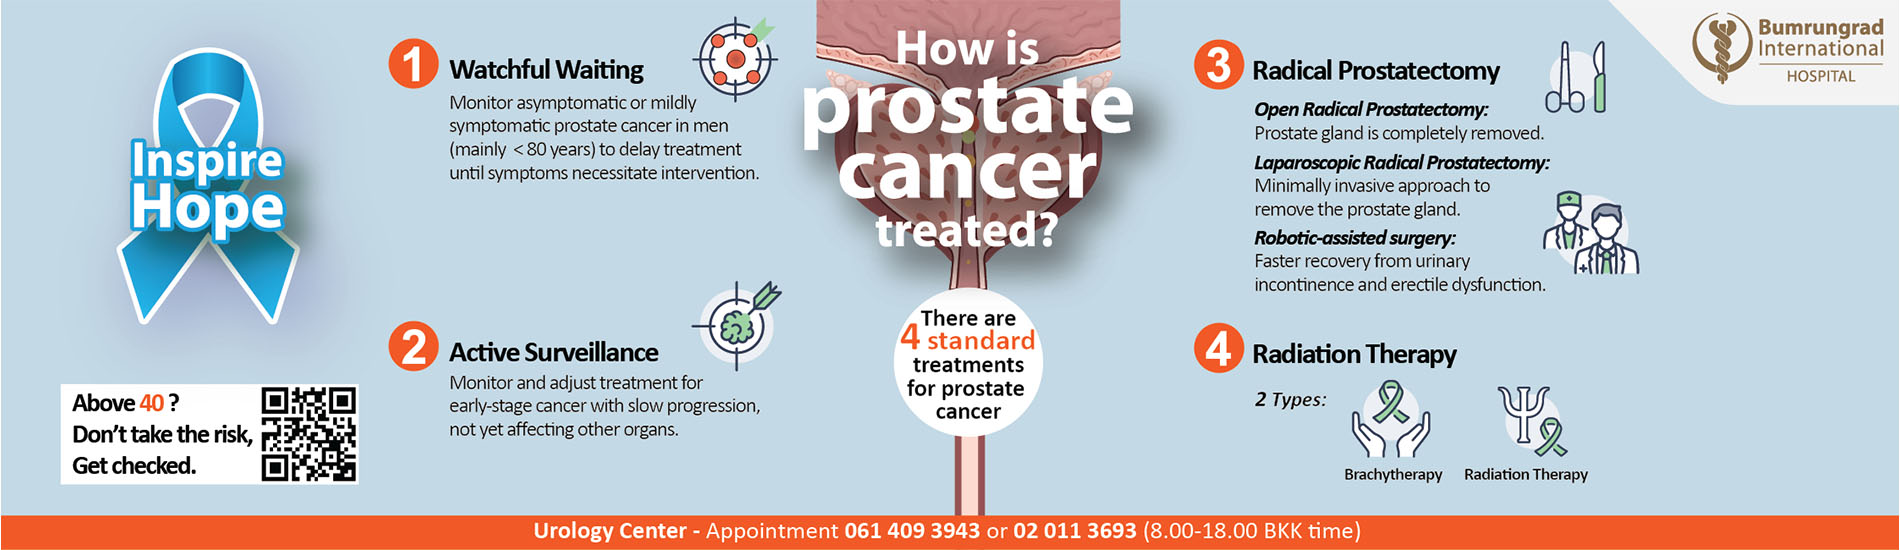 Prostate Checkup from Bumrungrad Hospital